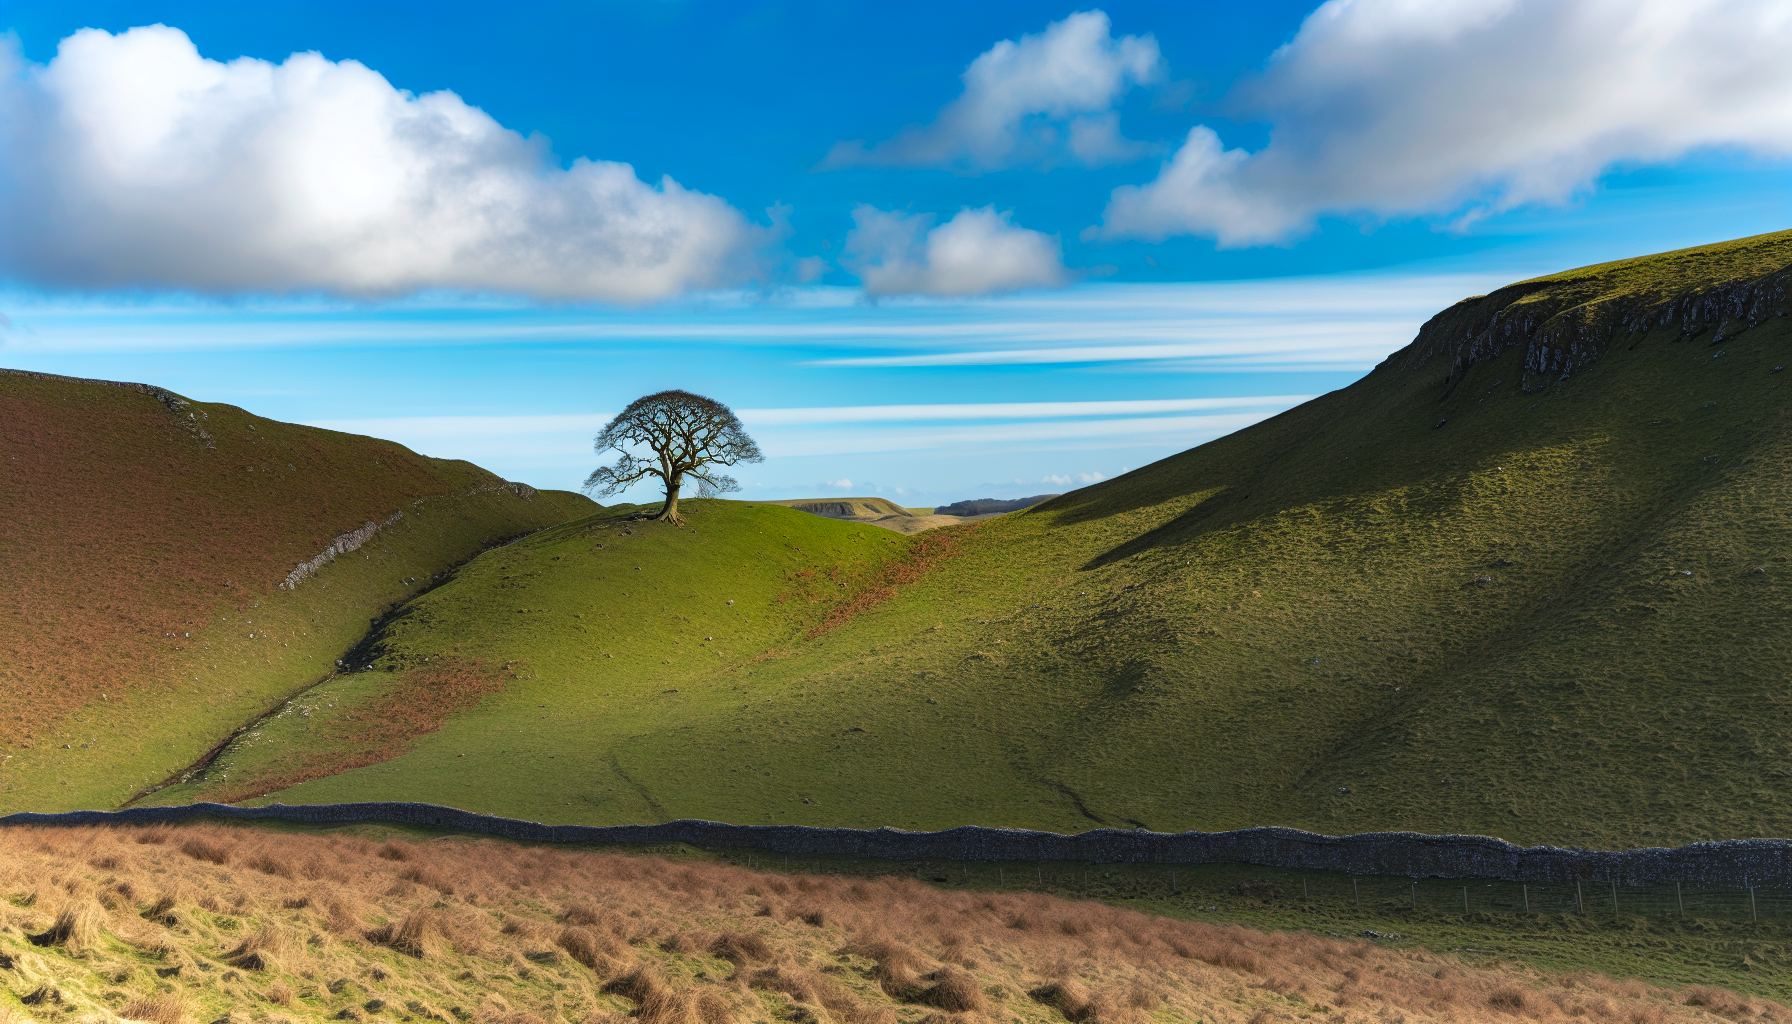 Sycamore Gap in the dramatic landscape